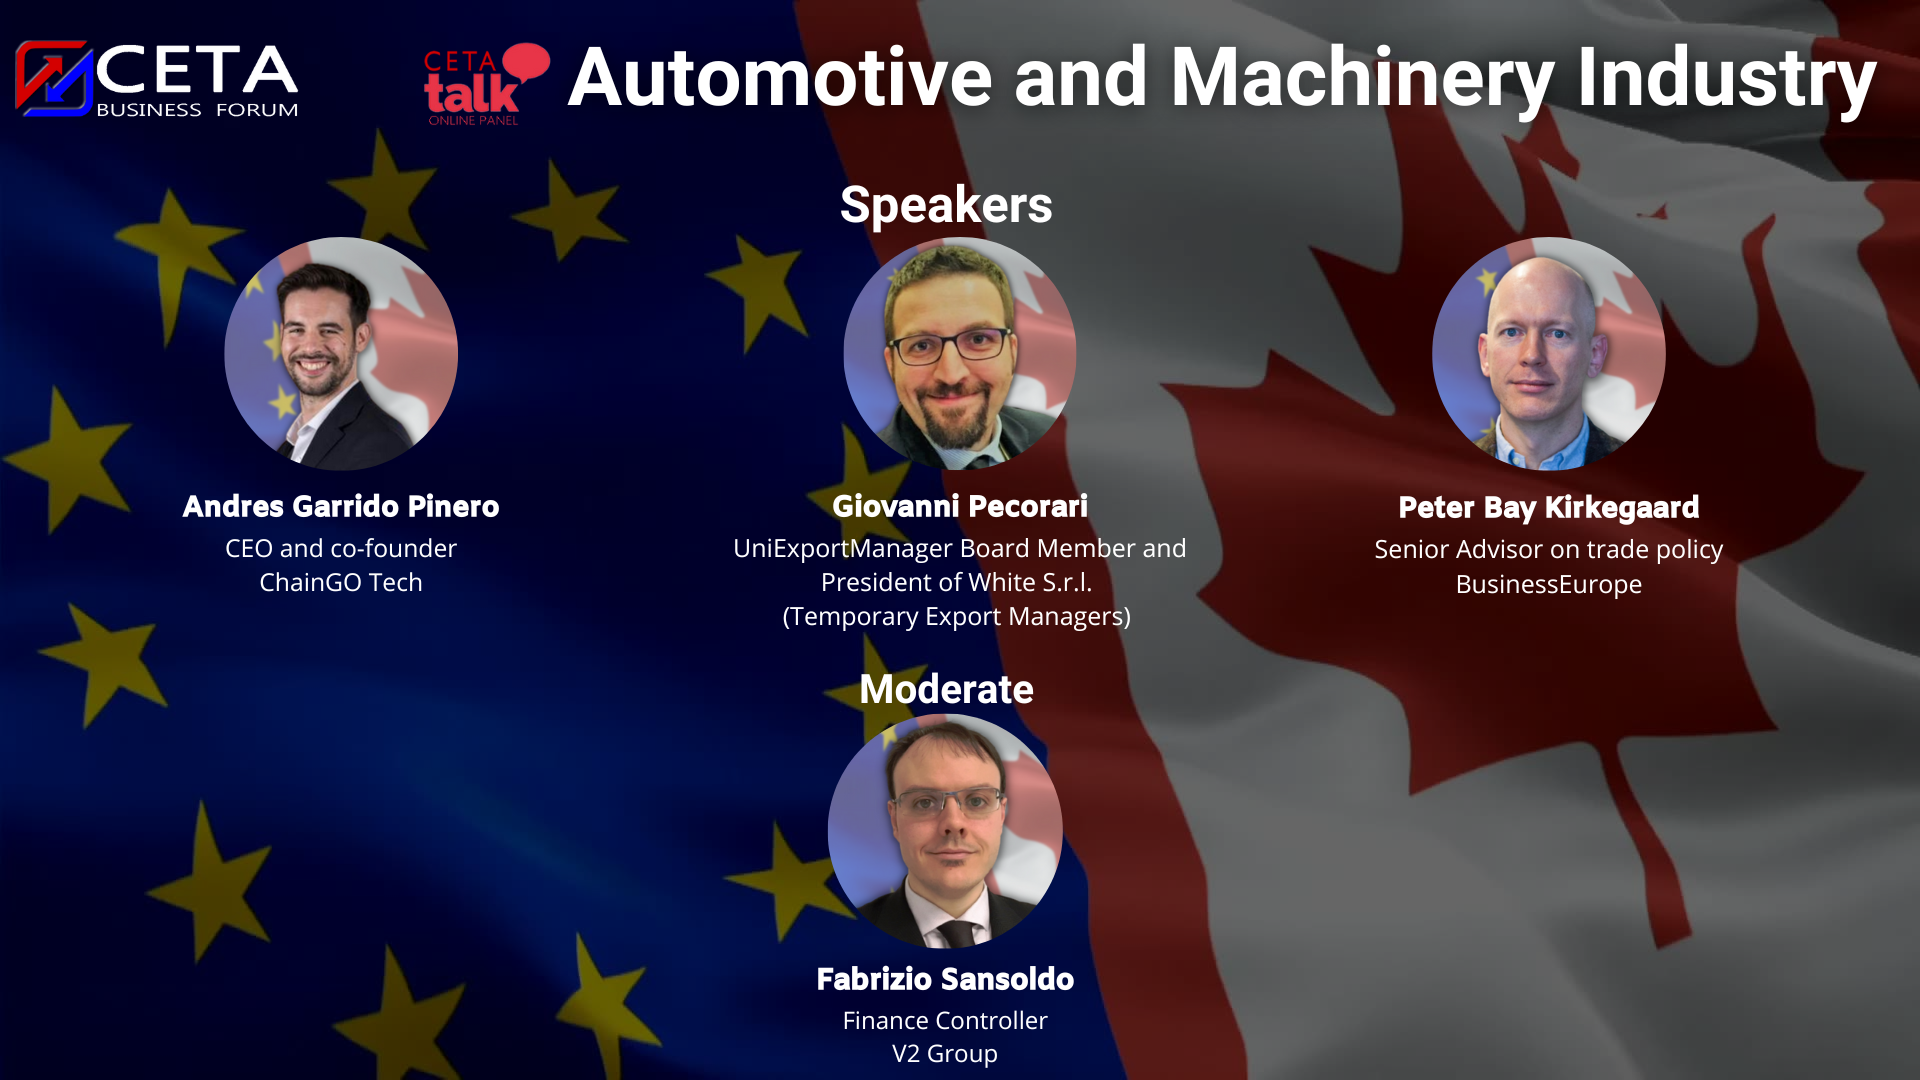 Image_Video_Automotive_and_Machinery_Industry_CETA_Business_Forum_2022